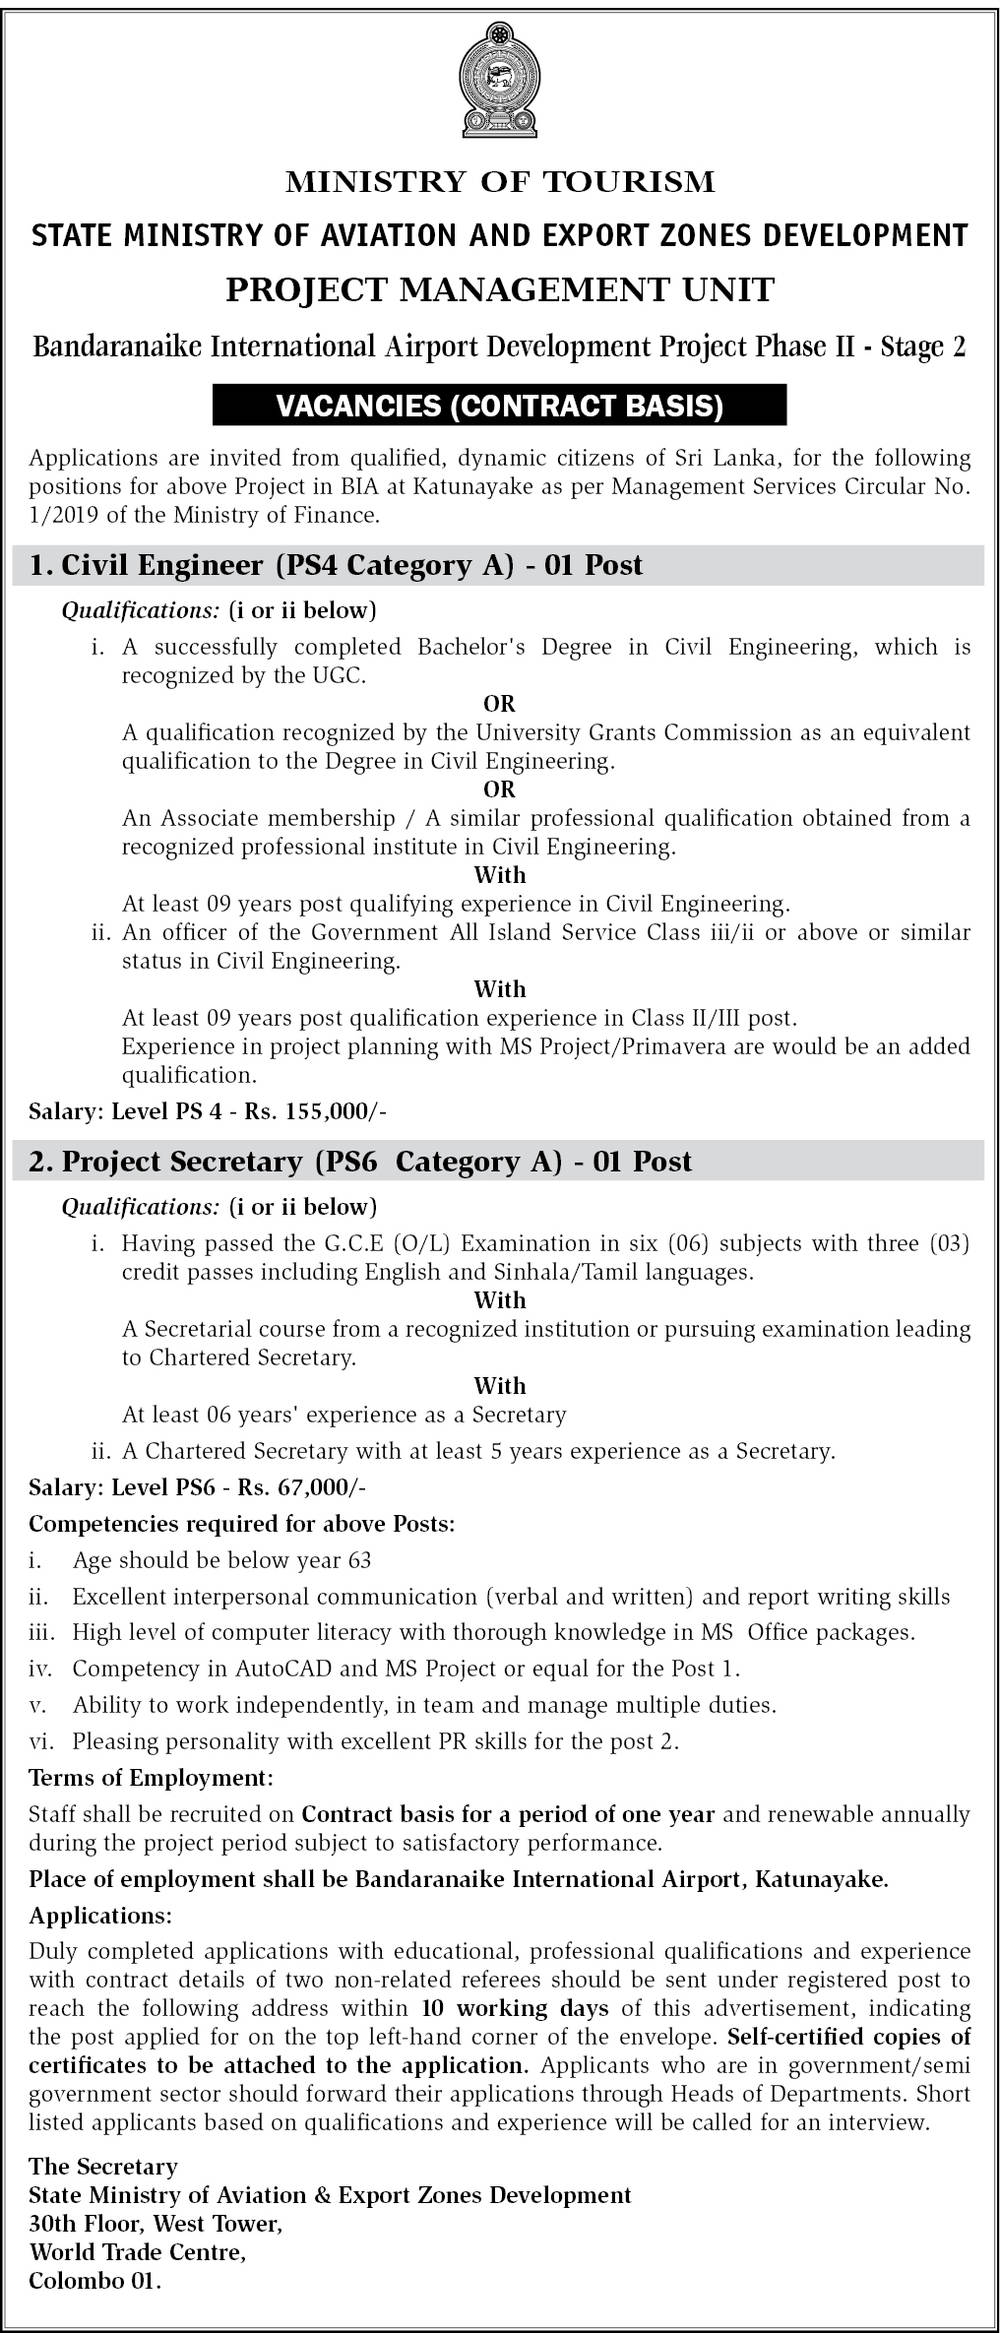 Civil Engineer & Project Secretary Job Vacancy in Ministry of Tourism Details